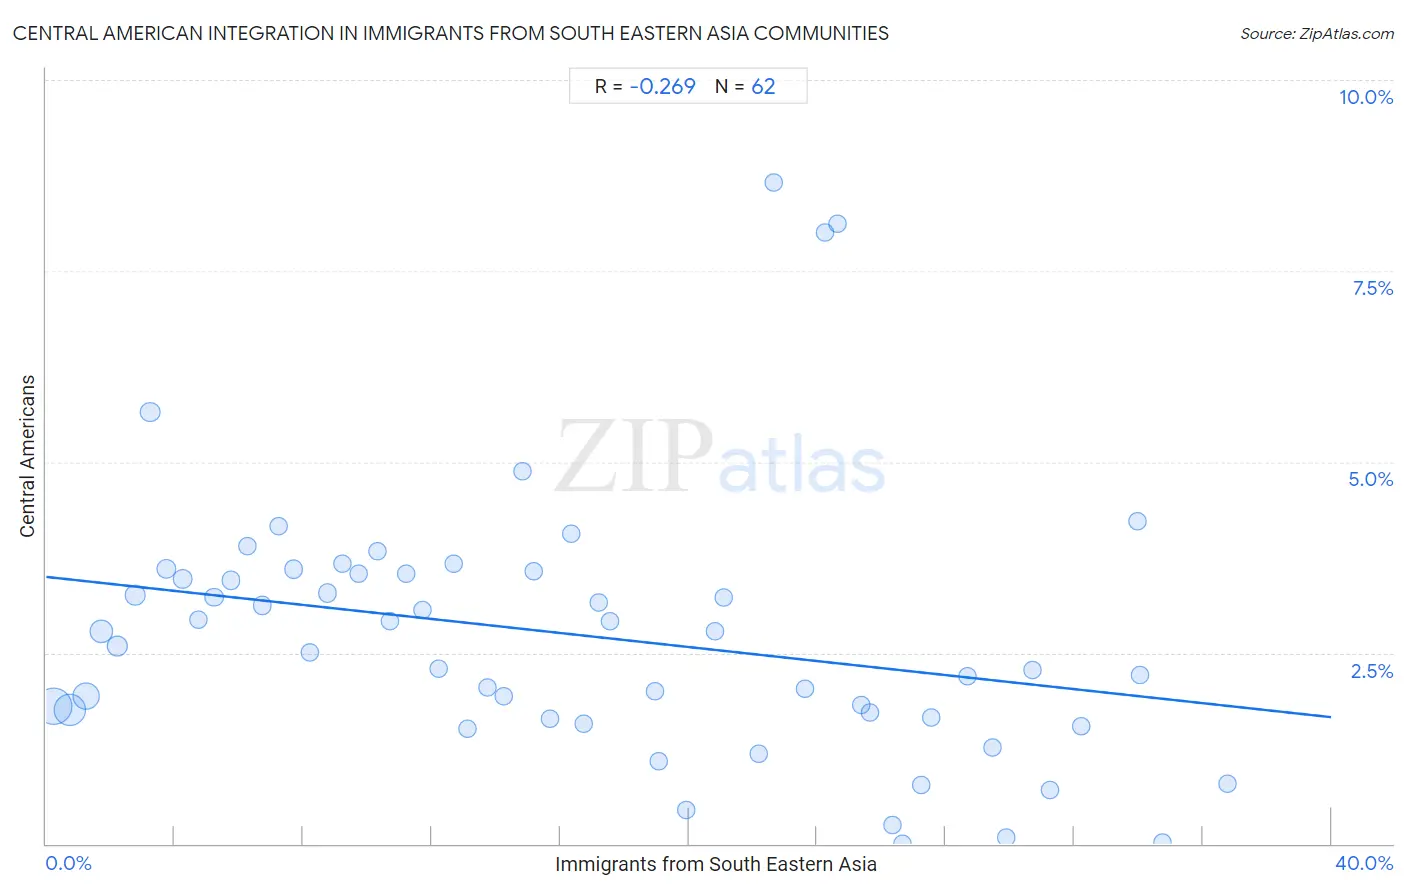 Immigrants from South Eastern Asia Integration in Central American Communities